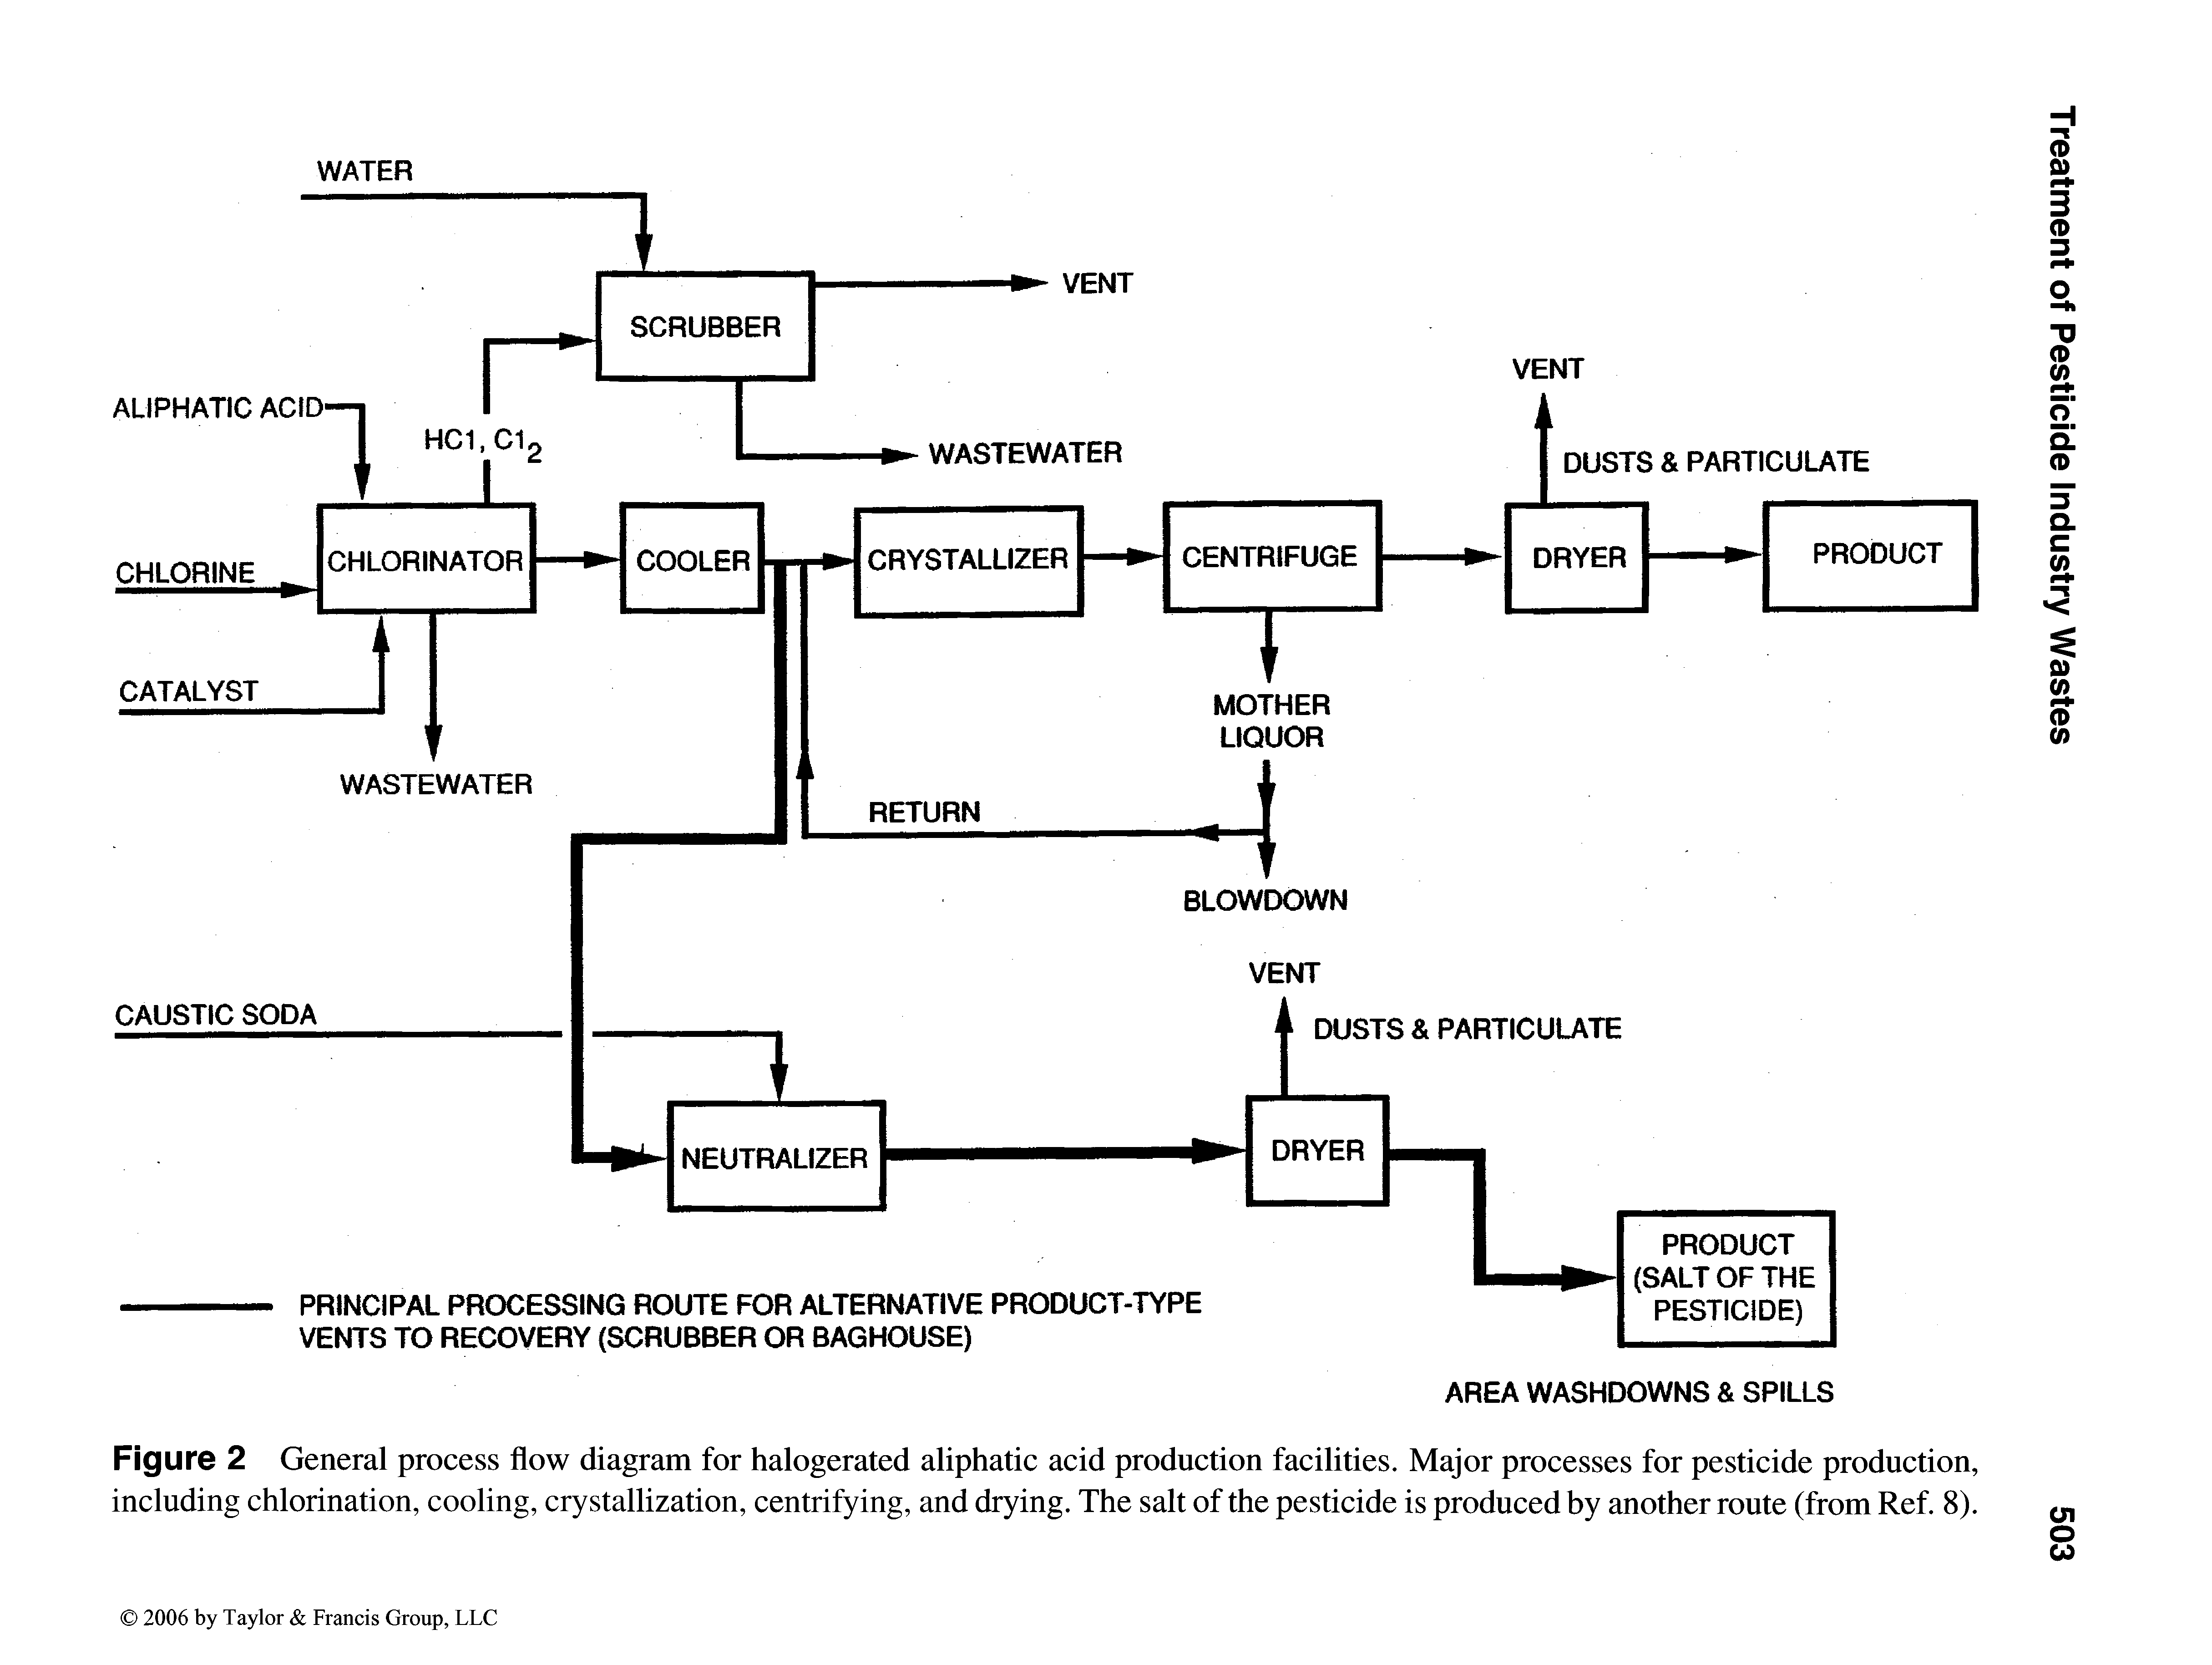 Figure 2 General process flow diagram for halogerated aliphatic acid production facilities. Major processes for pesticide production, including chlorination, cooling, crystallization, centrifying, and drying. The salt of the pesticide is produced by another route (from Ref. 8).